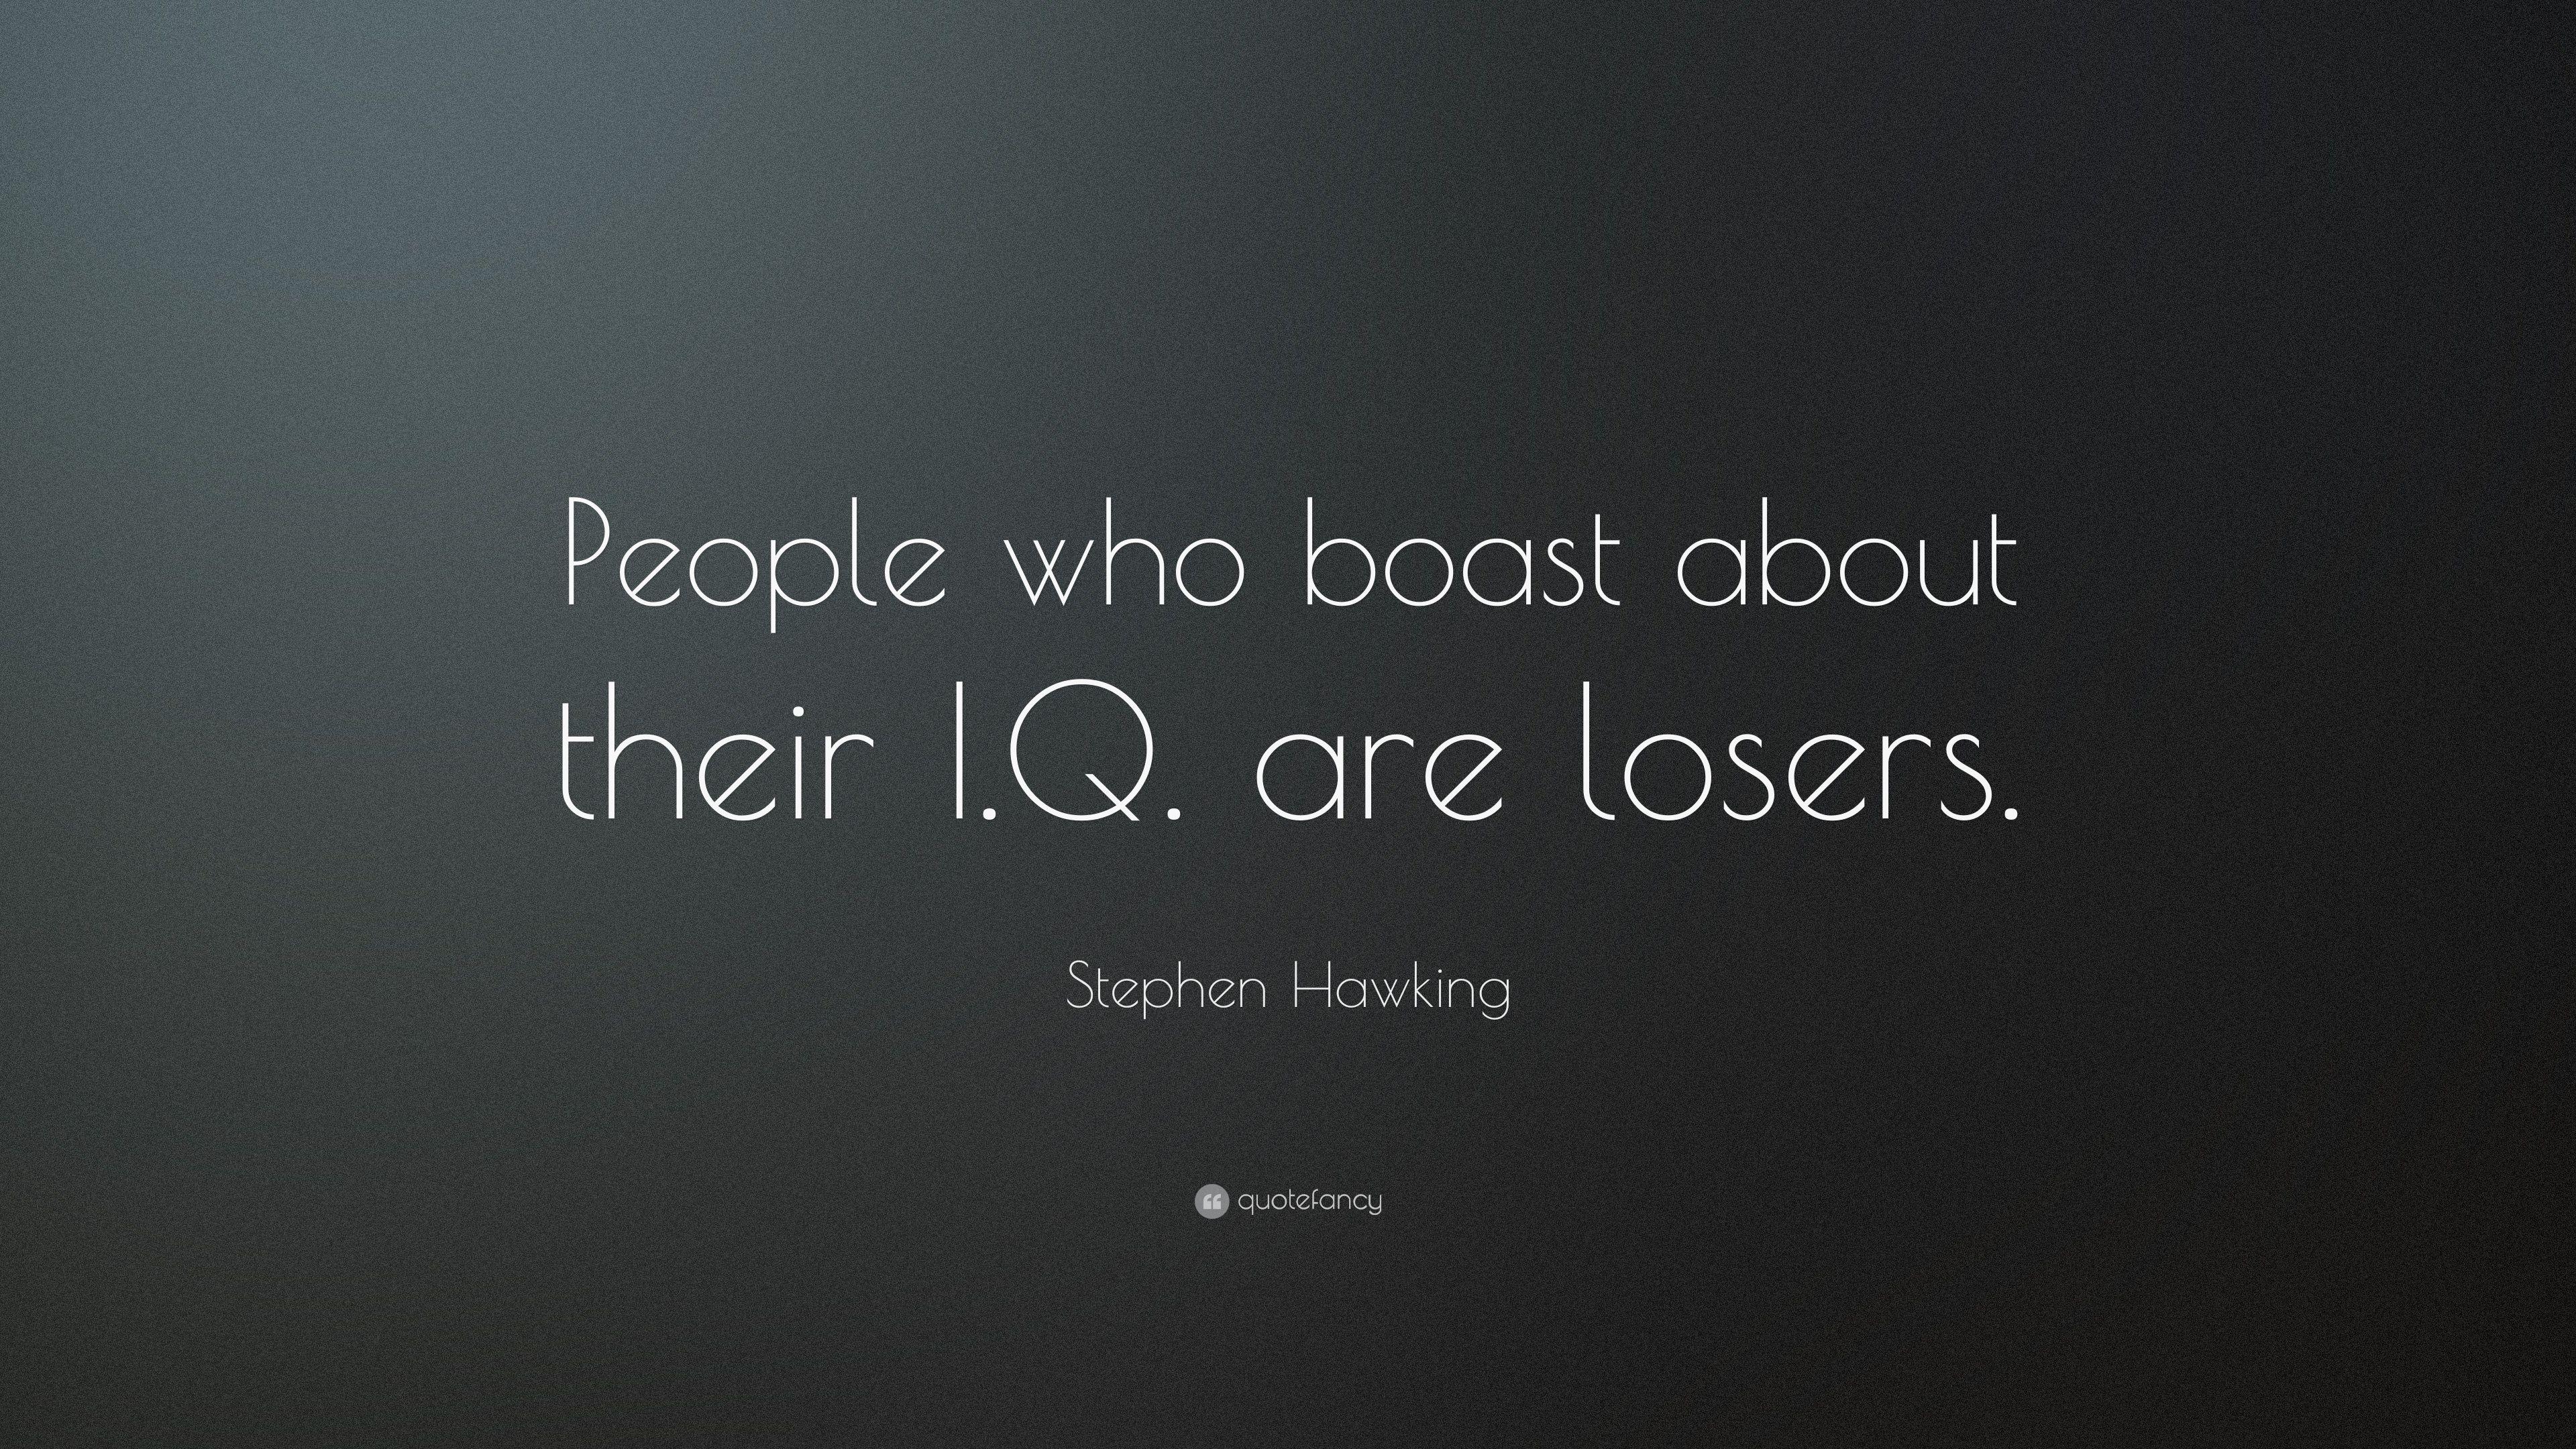 Stephen Hawking Quote: “People who boast about their I.Q. are